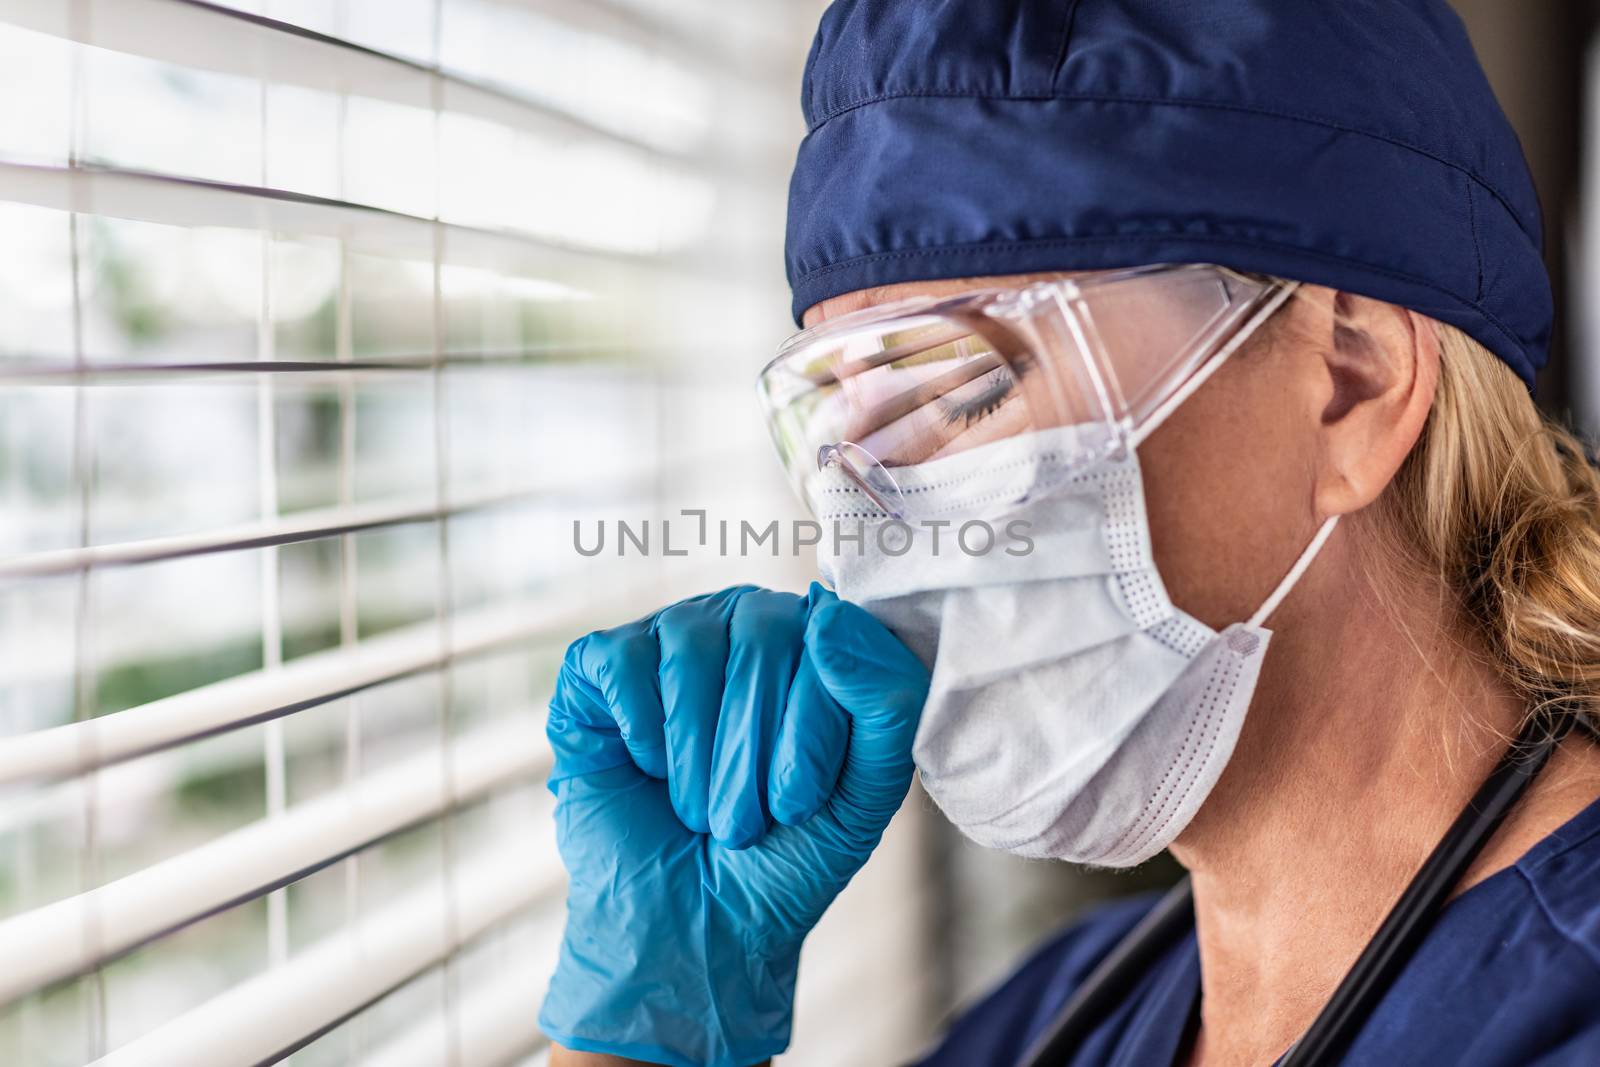 Female Doctor or Nurse On Break At Window Wearing Medical Face Mask and Goggles.